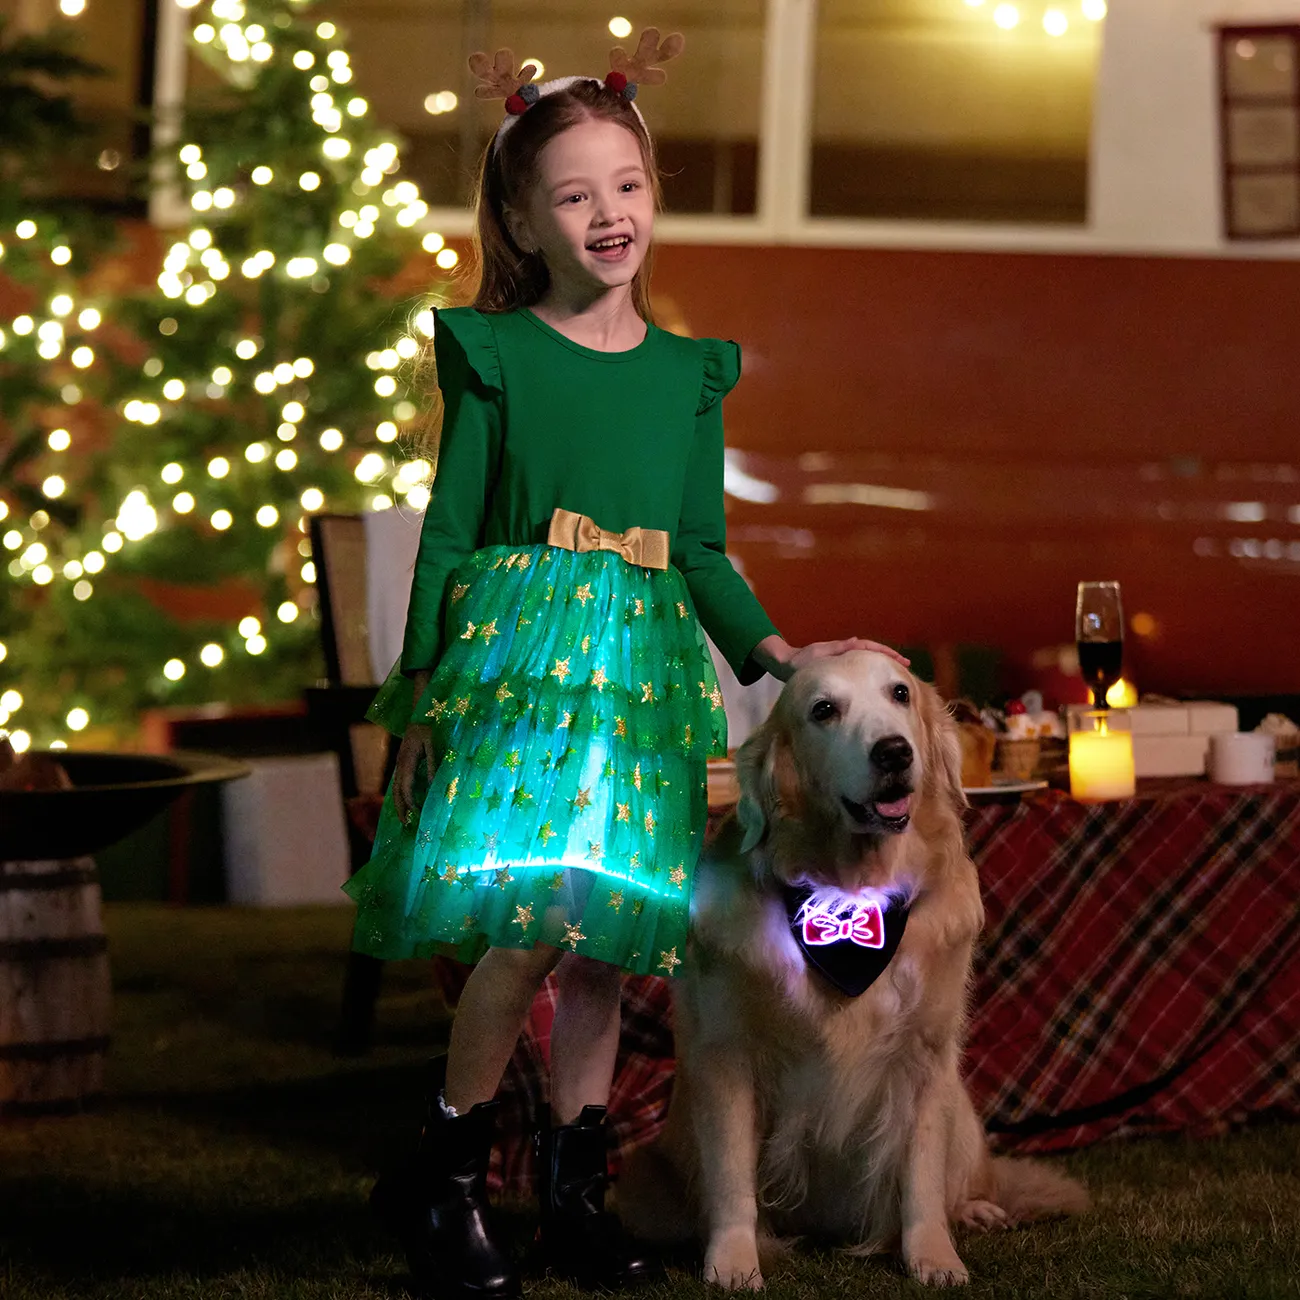 Go-Glow Christmas Family Matching Long-sleeve Tops with Christmas Tree glowing & Illuminating Dress with Light Up Skirt Including Controller (Built-In Battery) Green big image 1